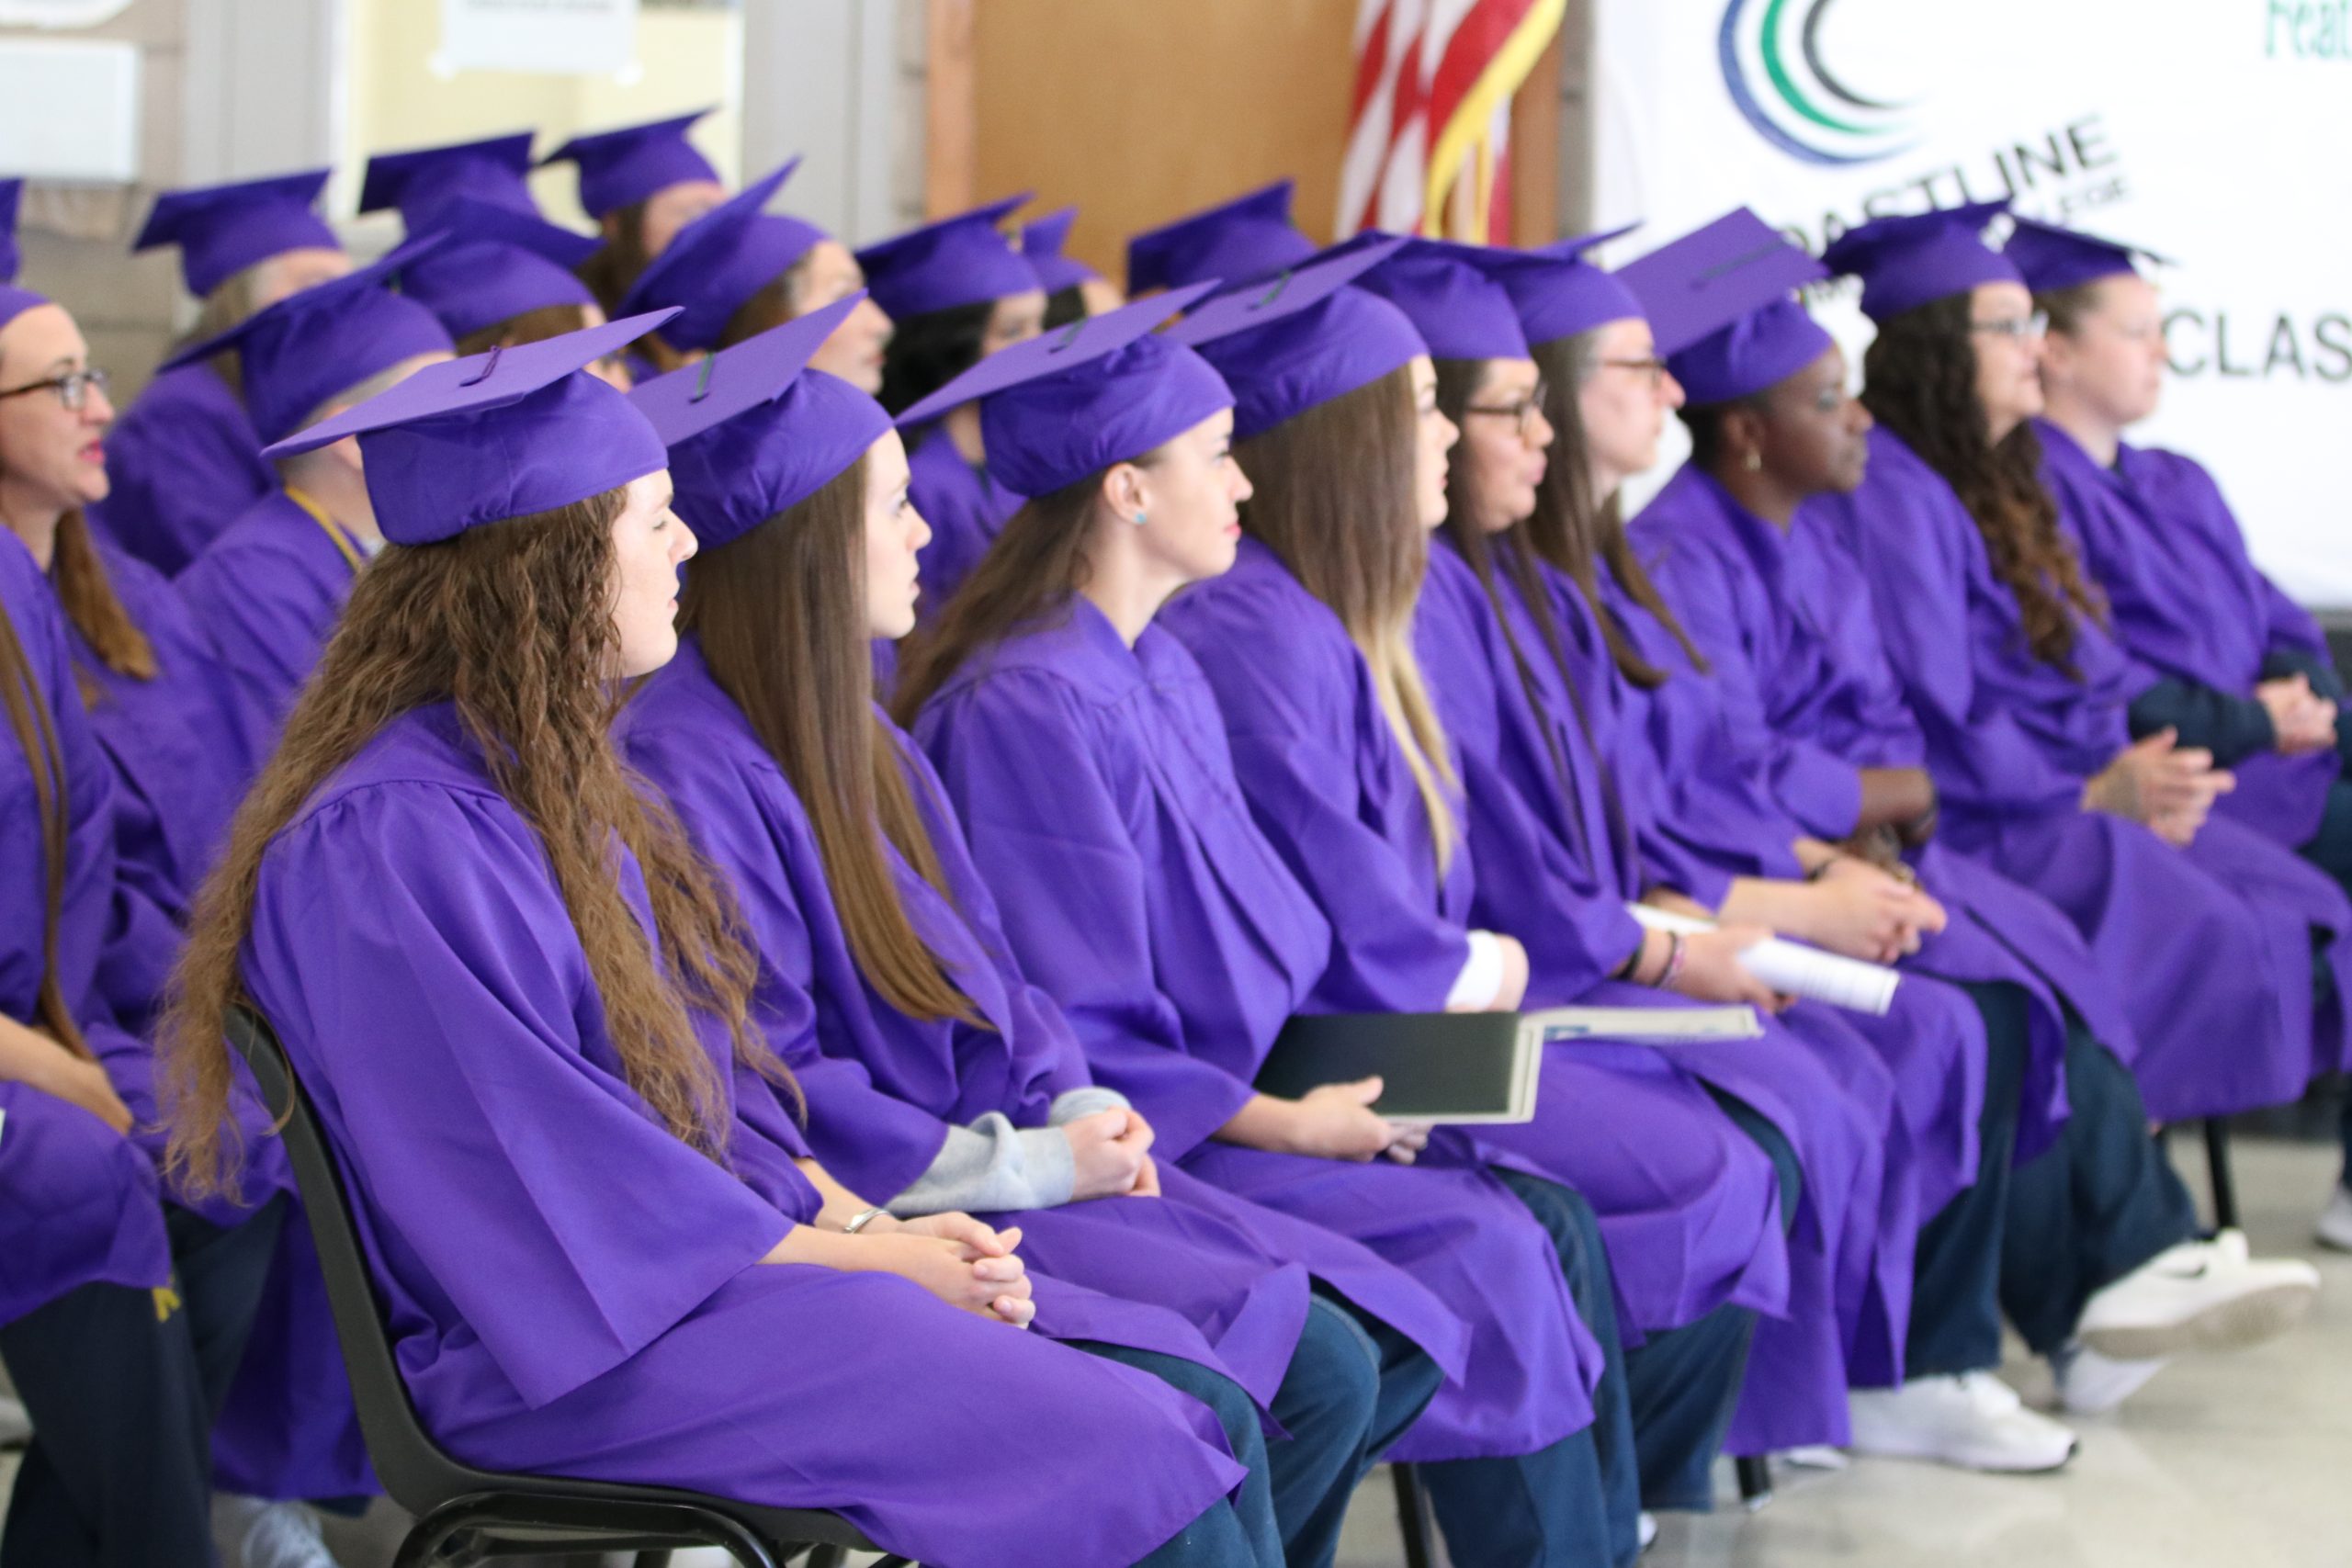 ccwf graduates sitting together at the ceremony